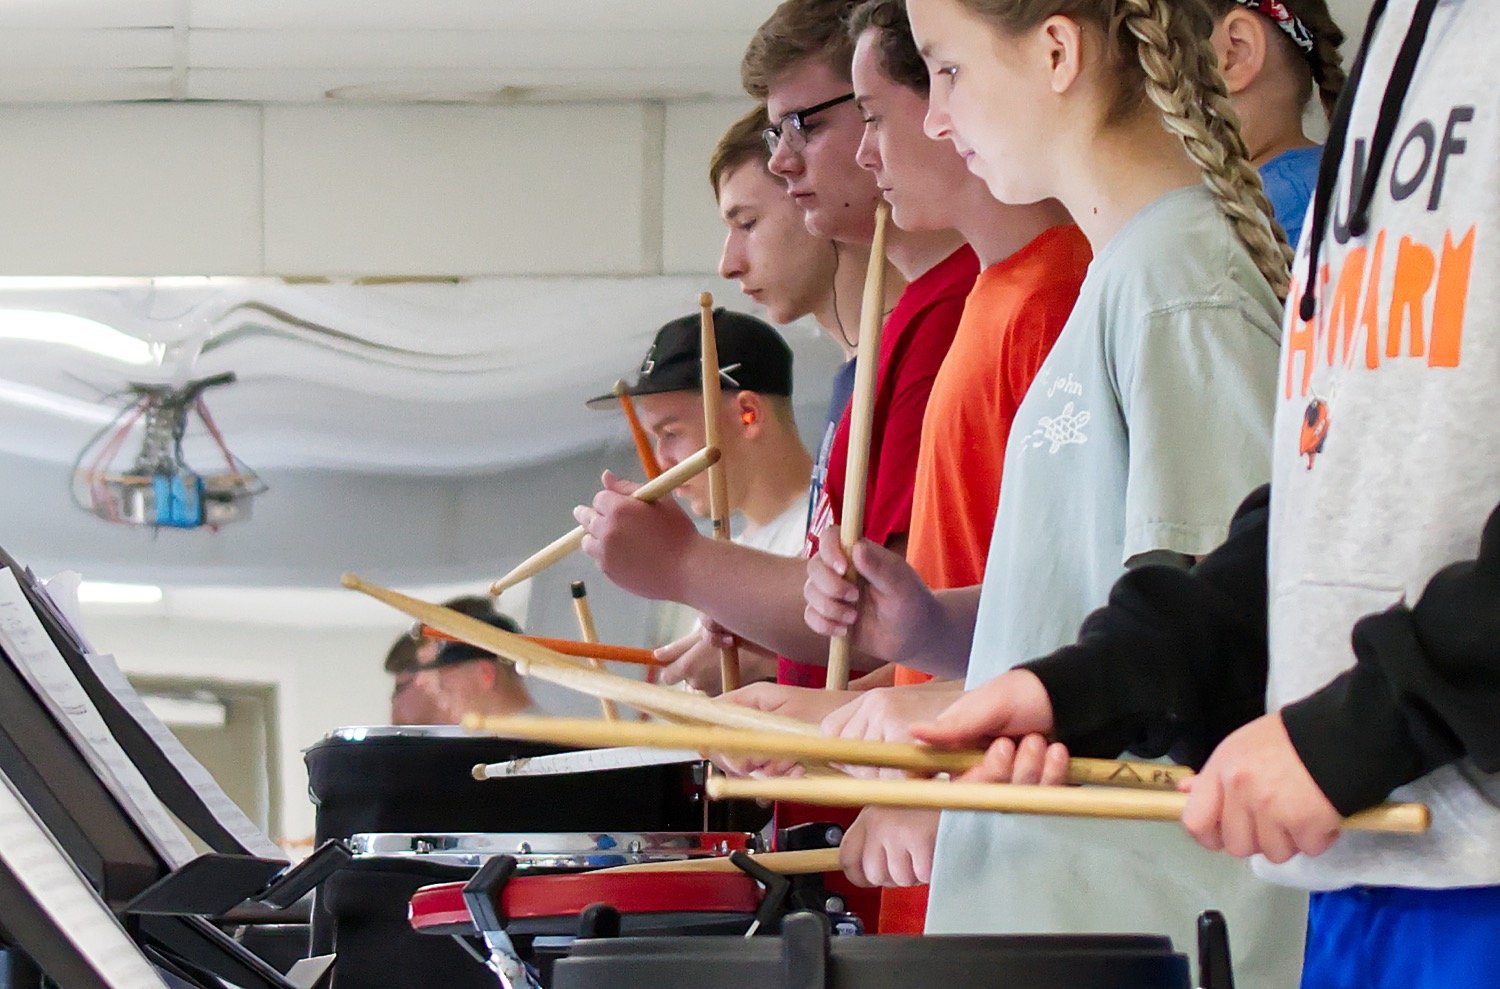 The Sound of the Swarm had scheduled a percussion camp starting Monday, and were able to jump in as planned.